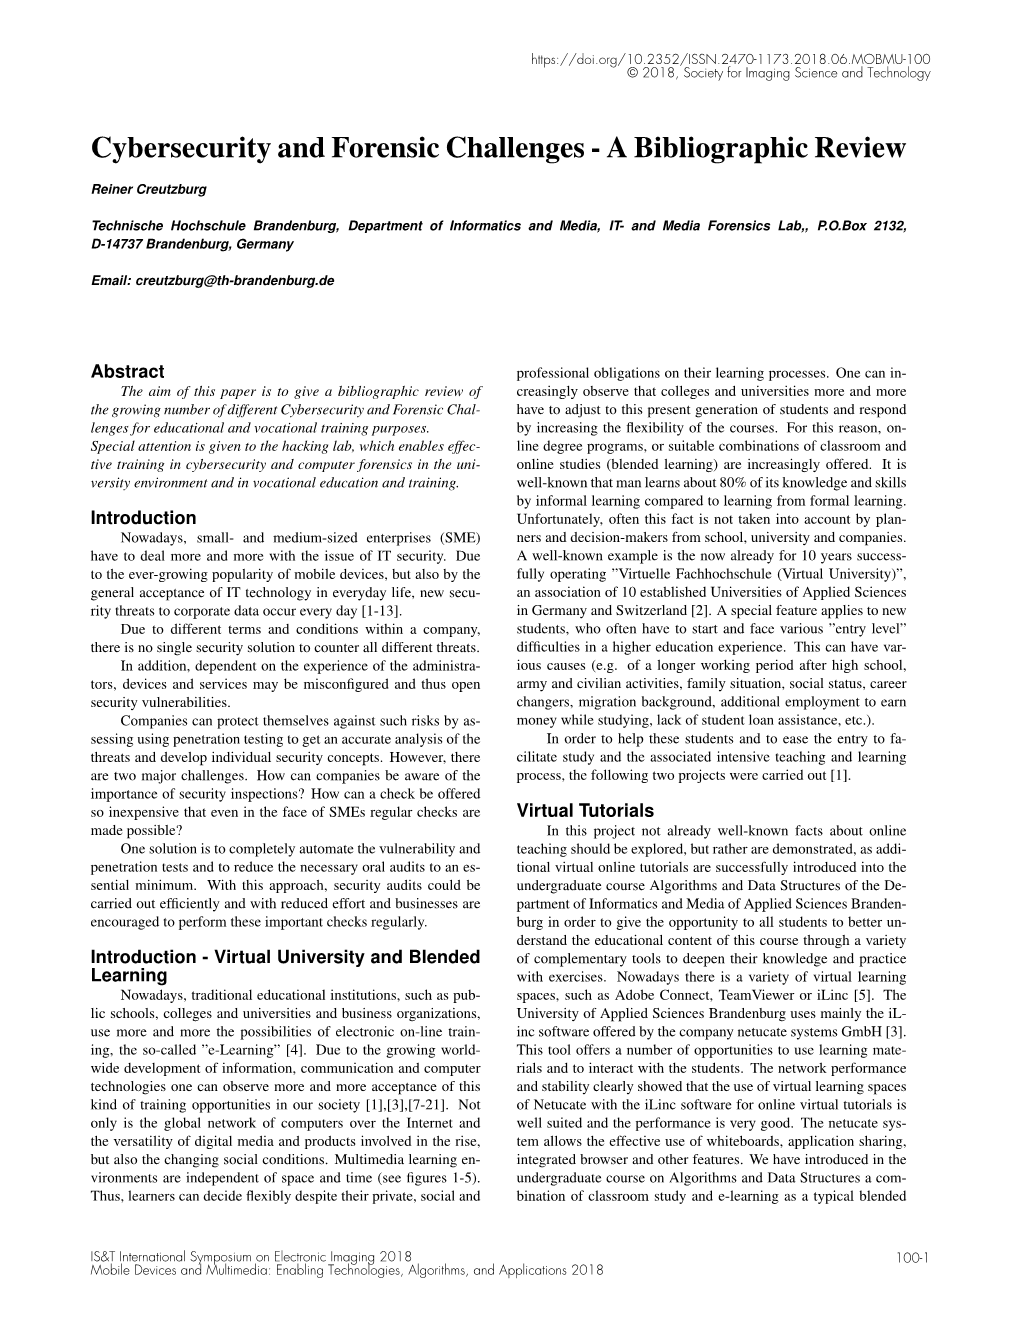 Cybersecurity and Forensic Challenges - a Bibliographic Review